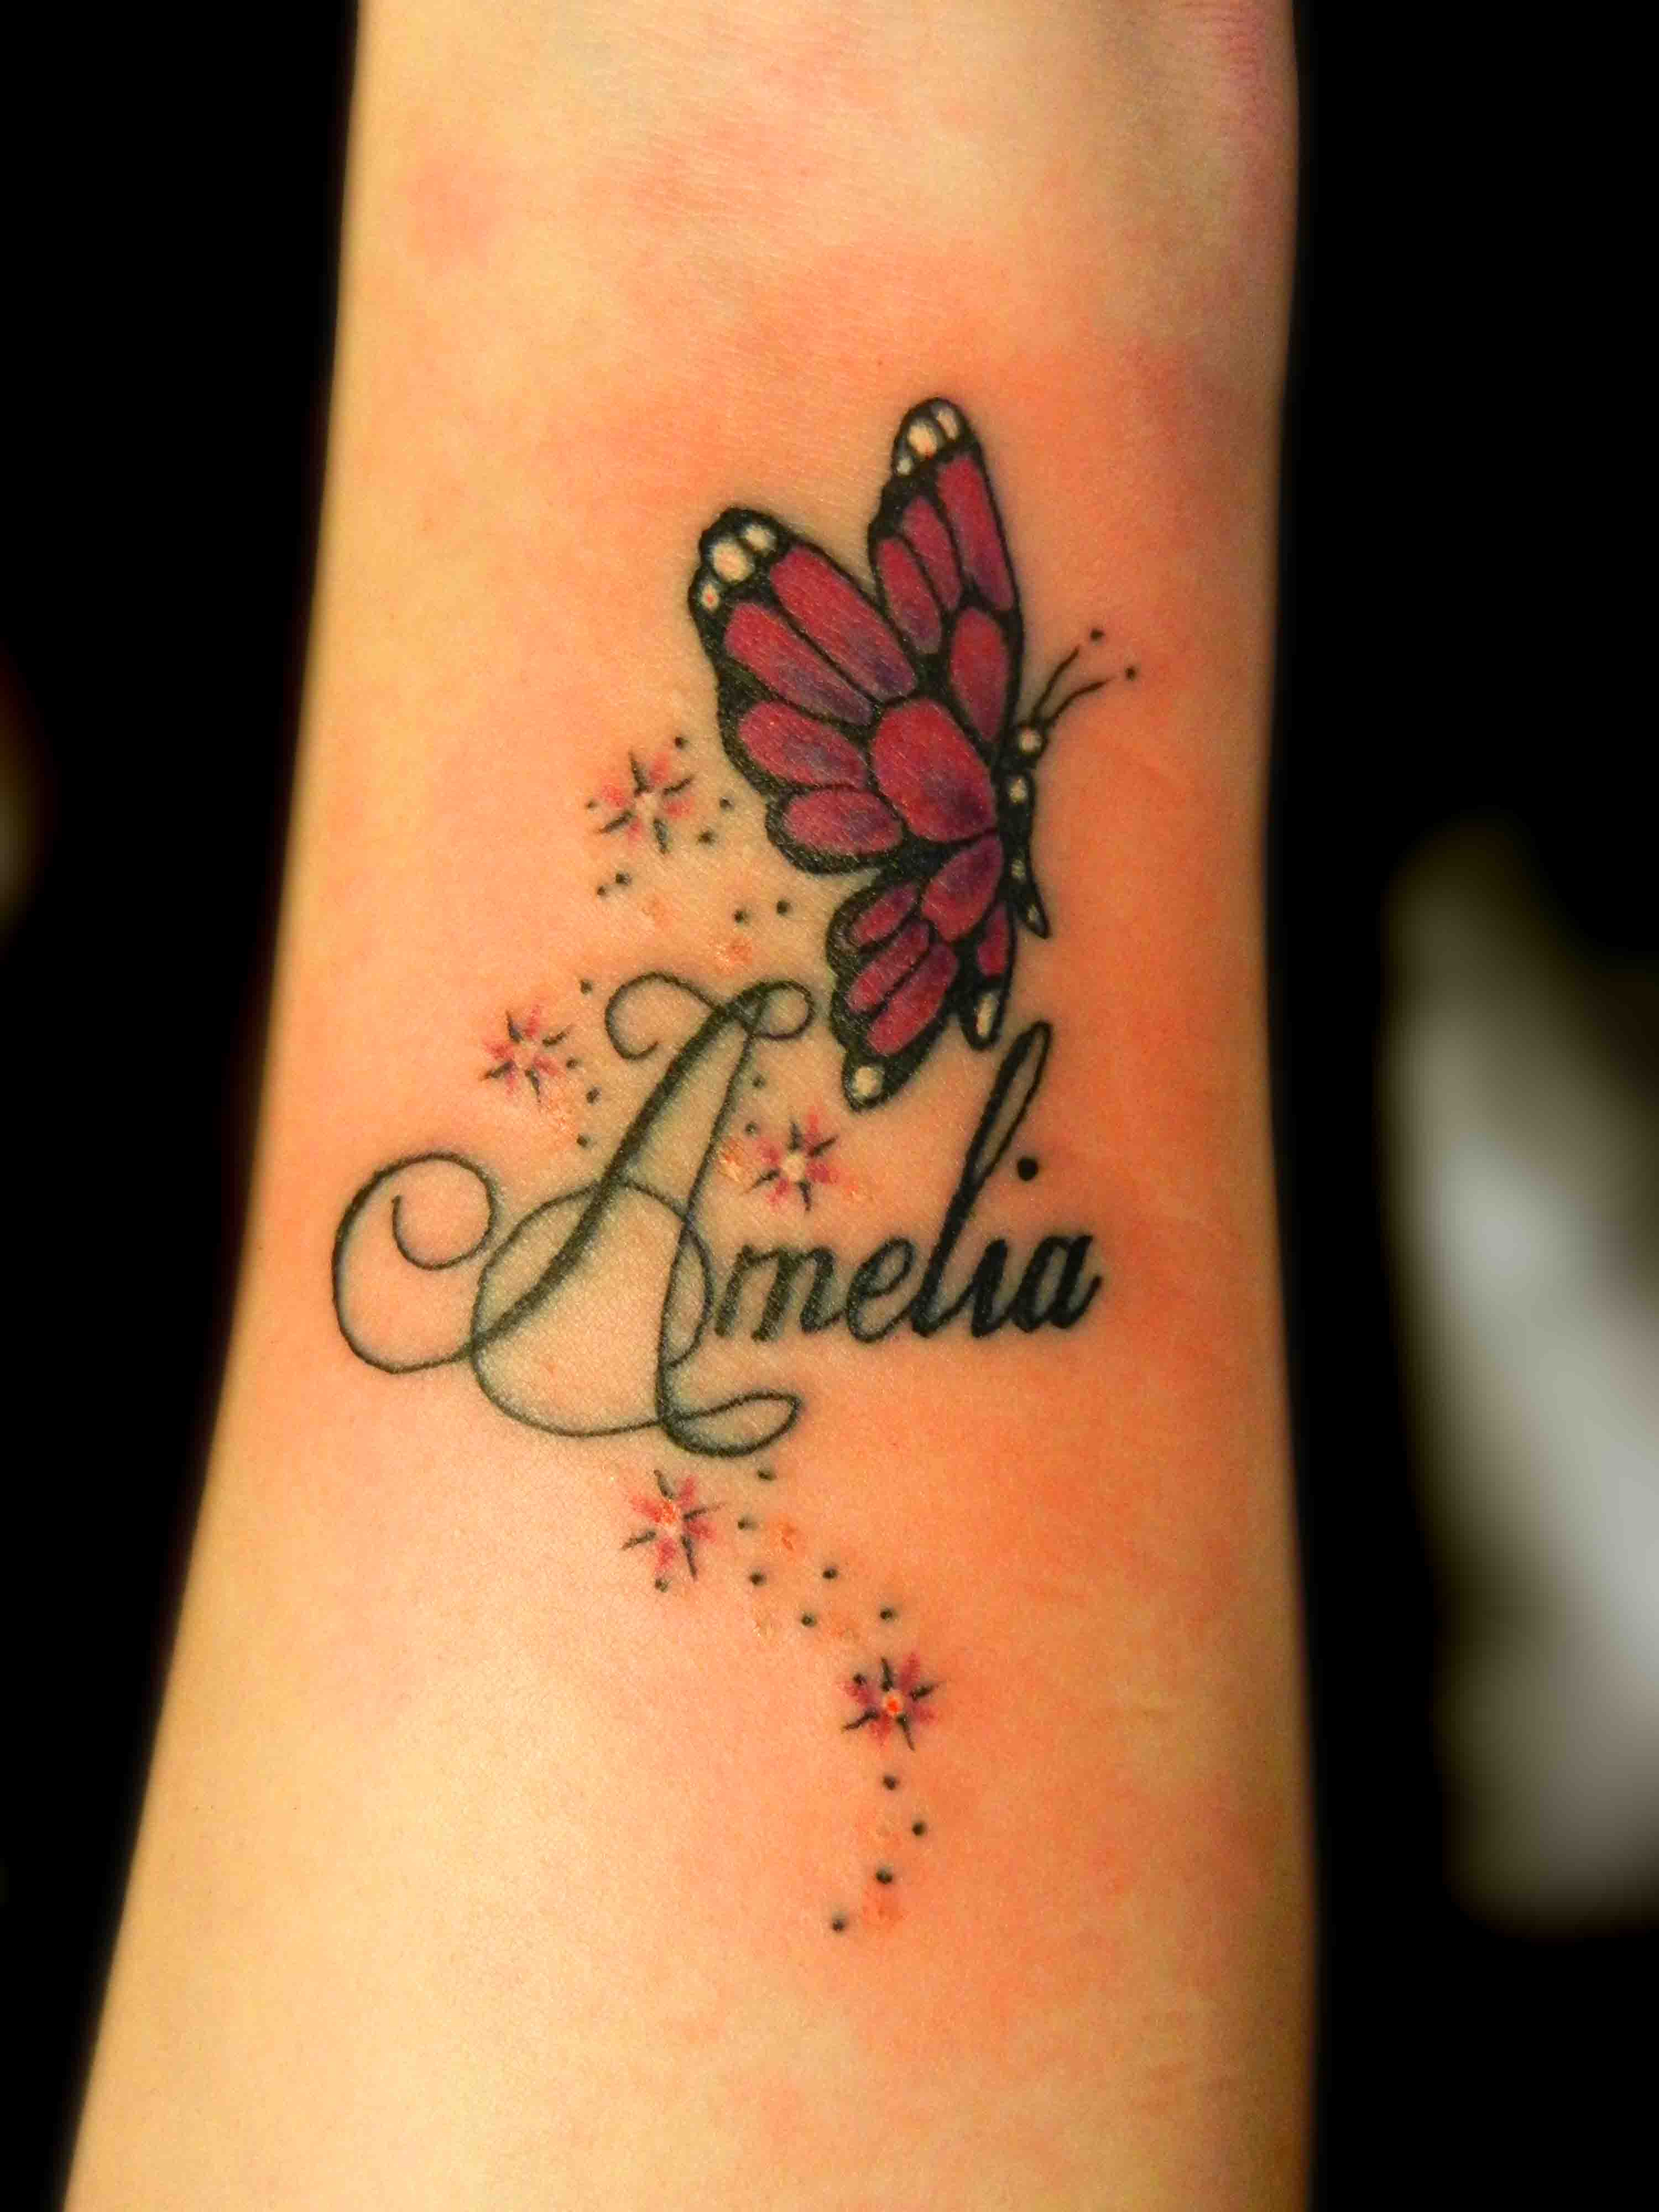 Butterfly Tattoo Names And Stars Twinkles Girly Wrist in measurements 3000 X 4000